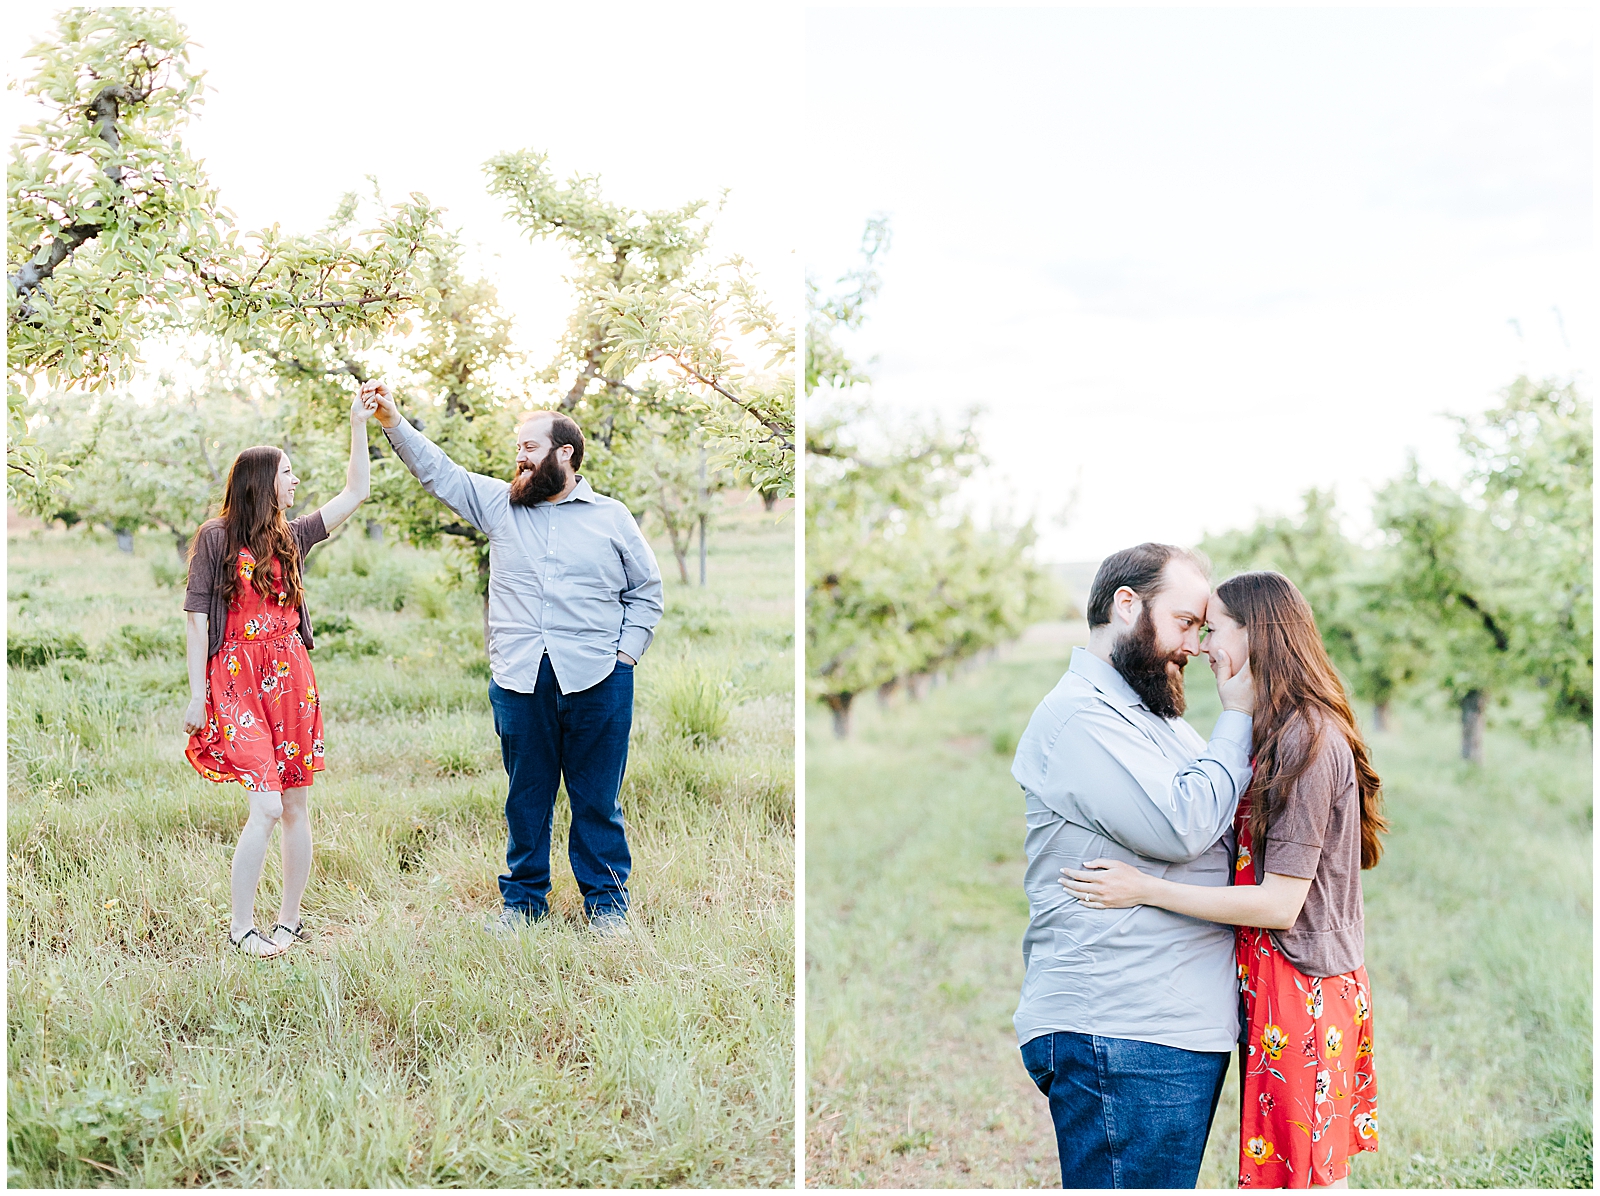 Cabalo's Orchard Engagement Session